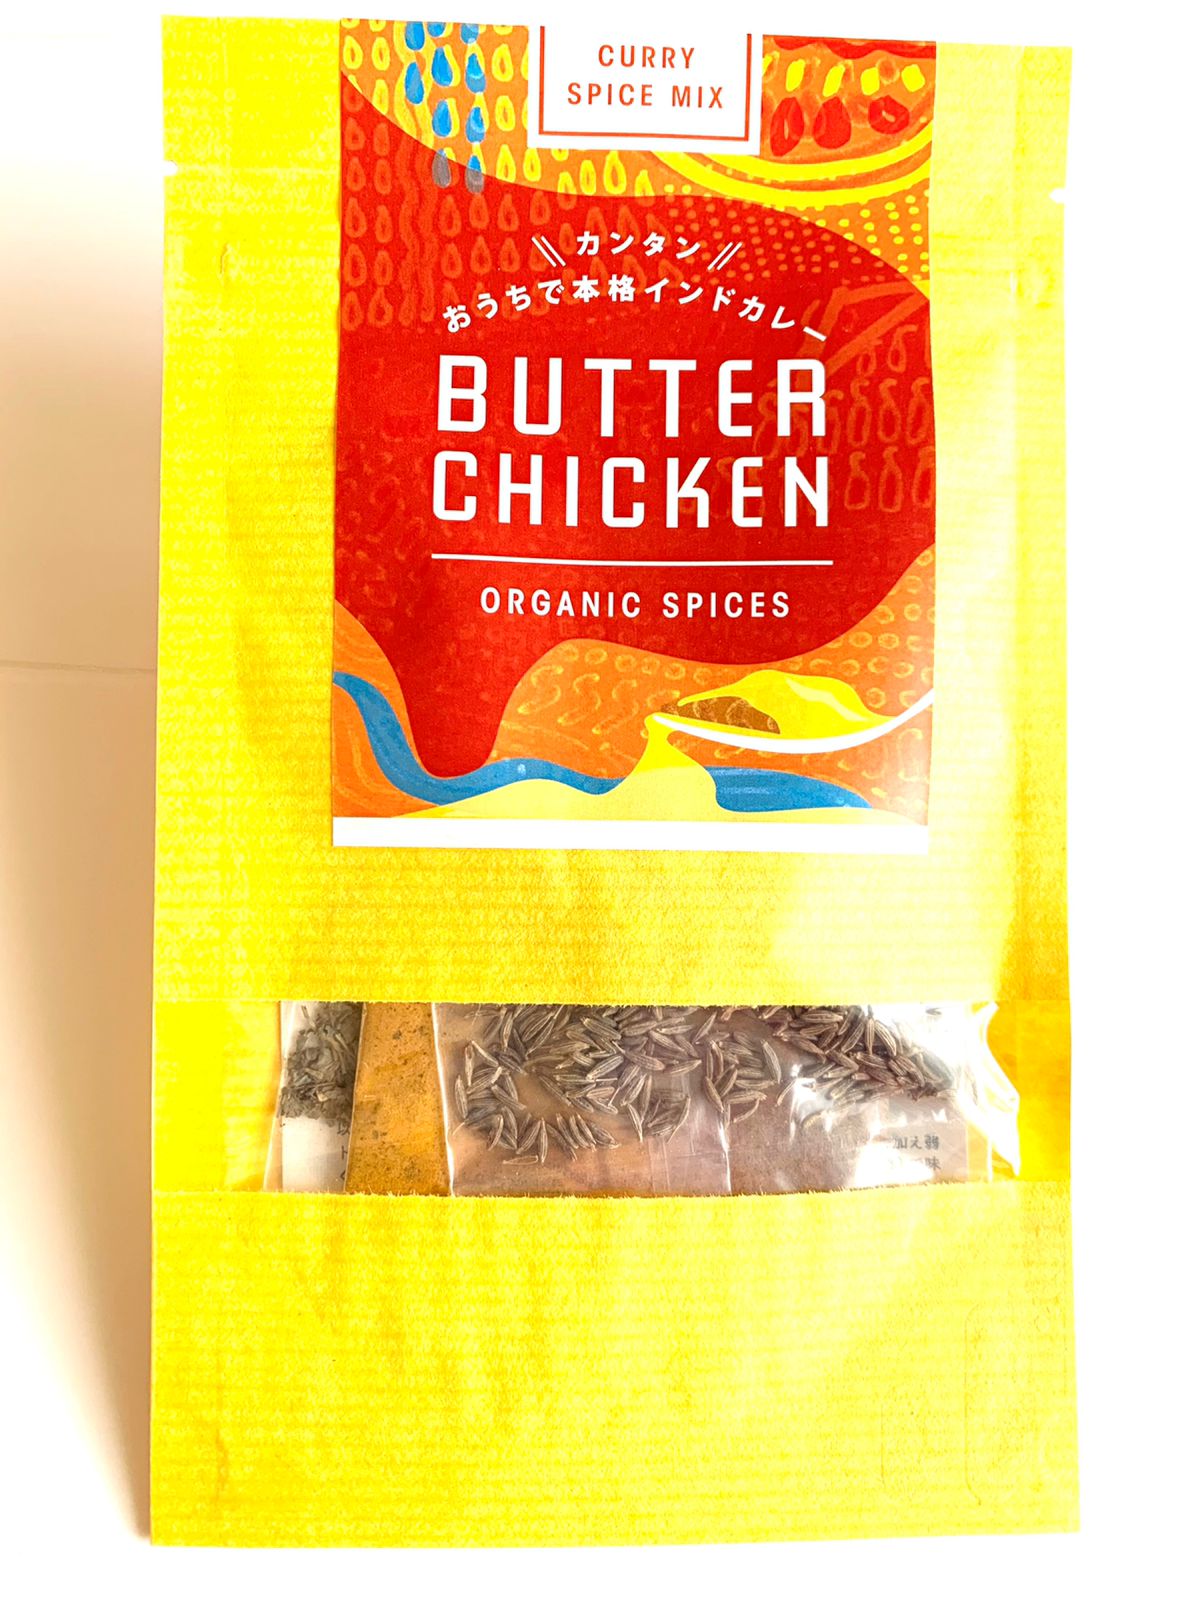 Butter Chicken [Curry Spice Mix]